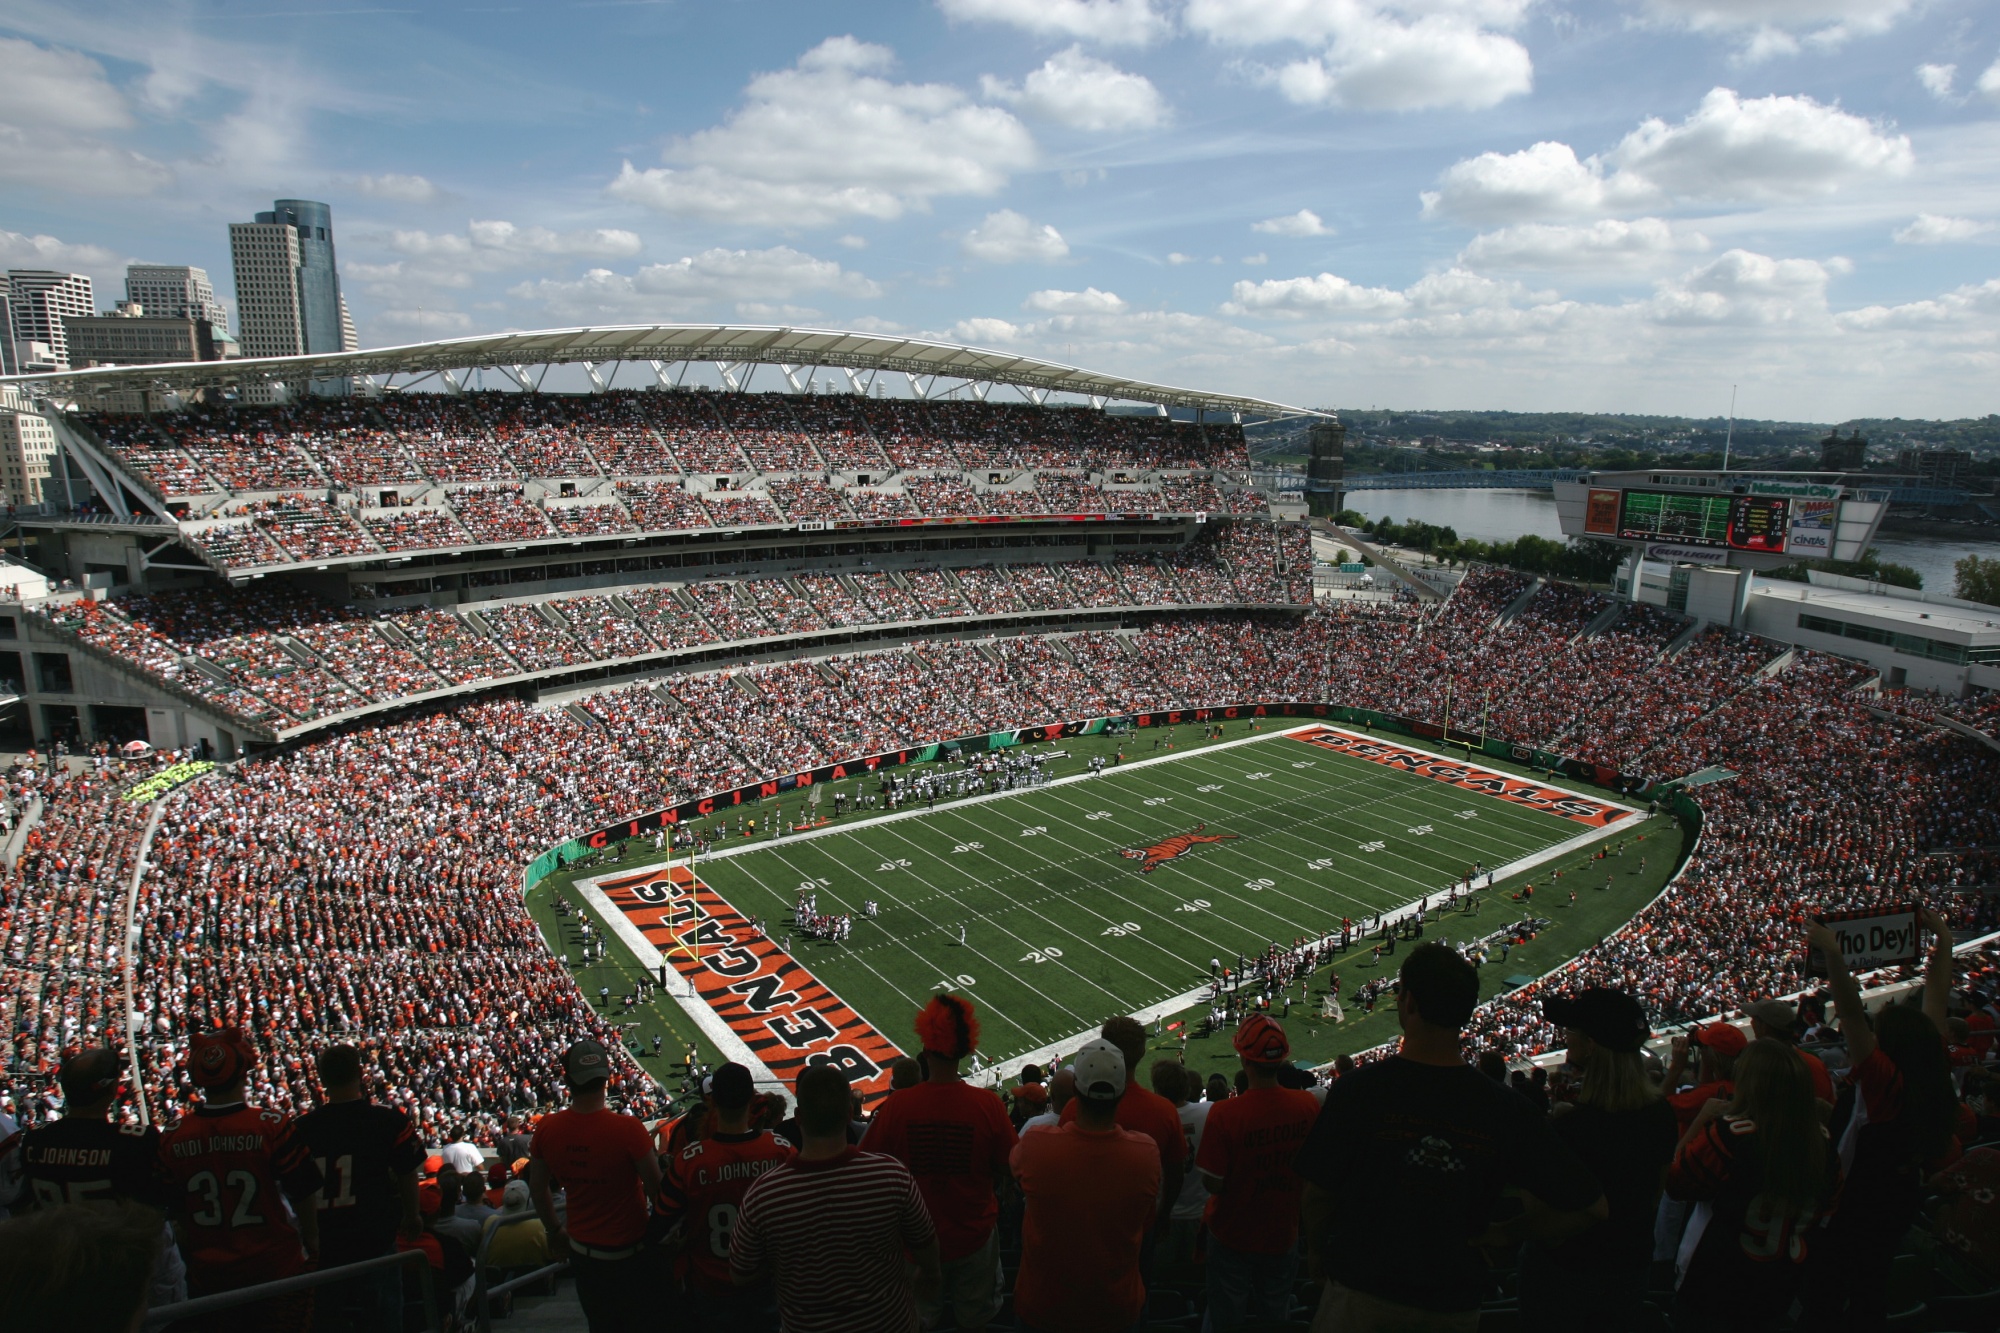 Bengals Stadium Name Paycor Acquires Rights In 16 Year Deal Pycr